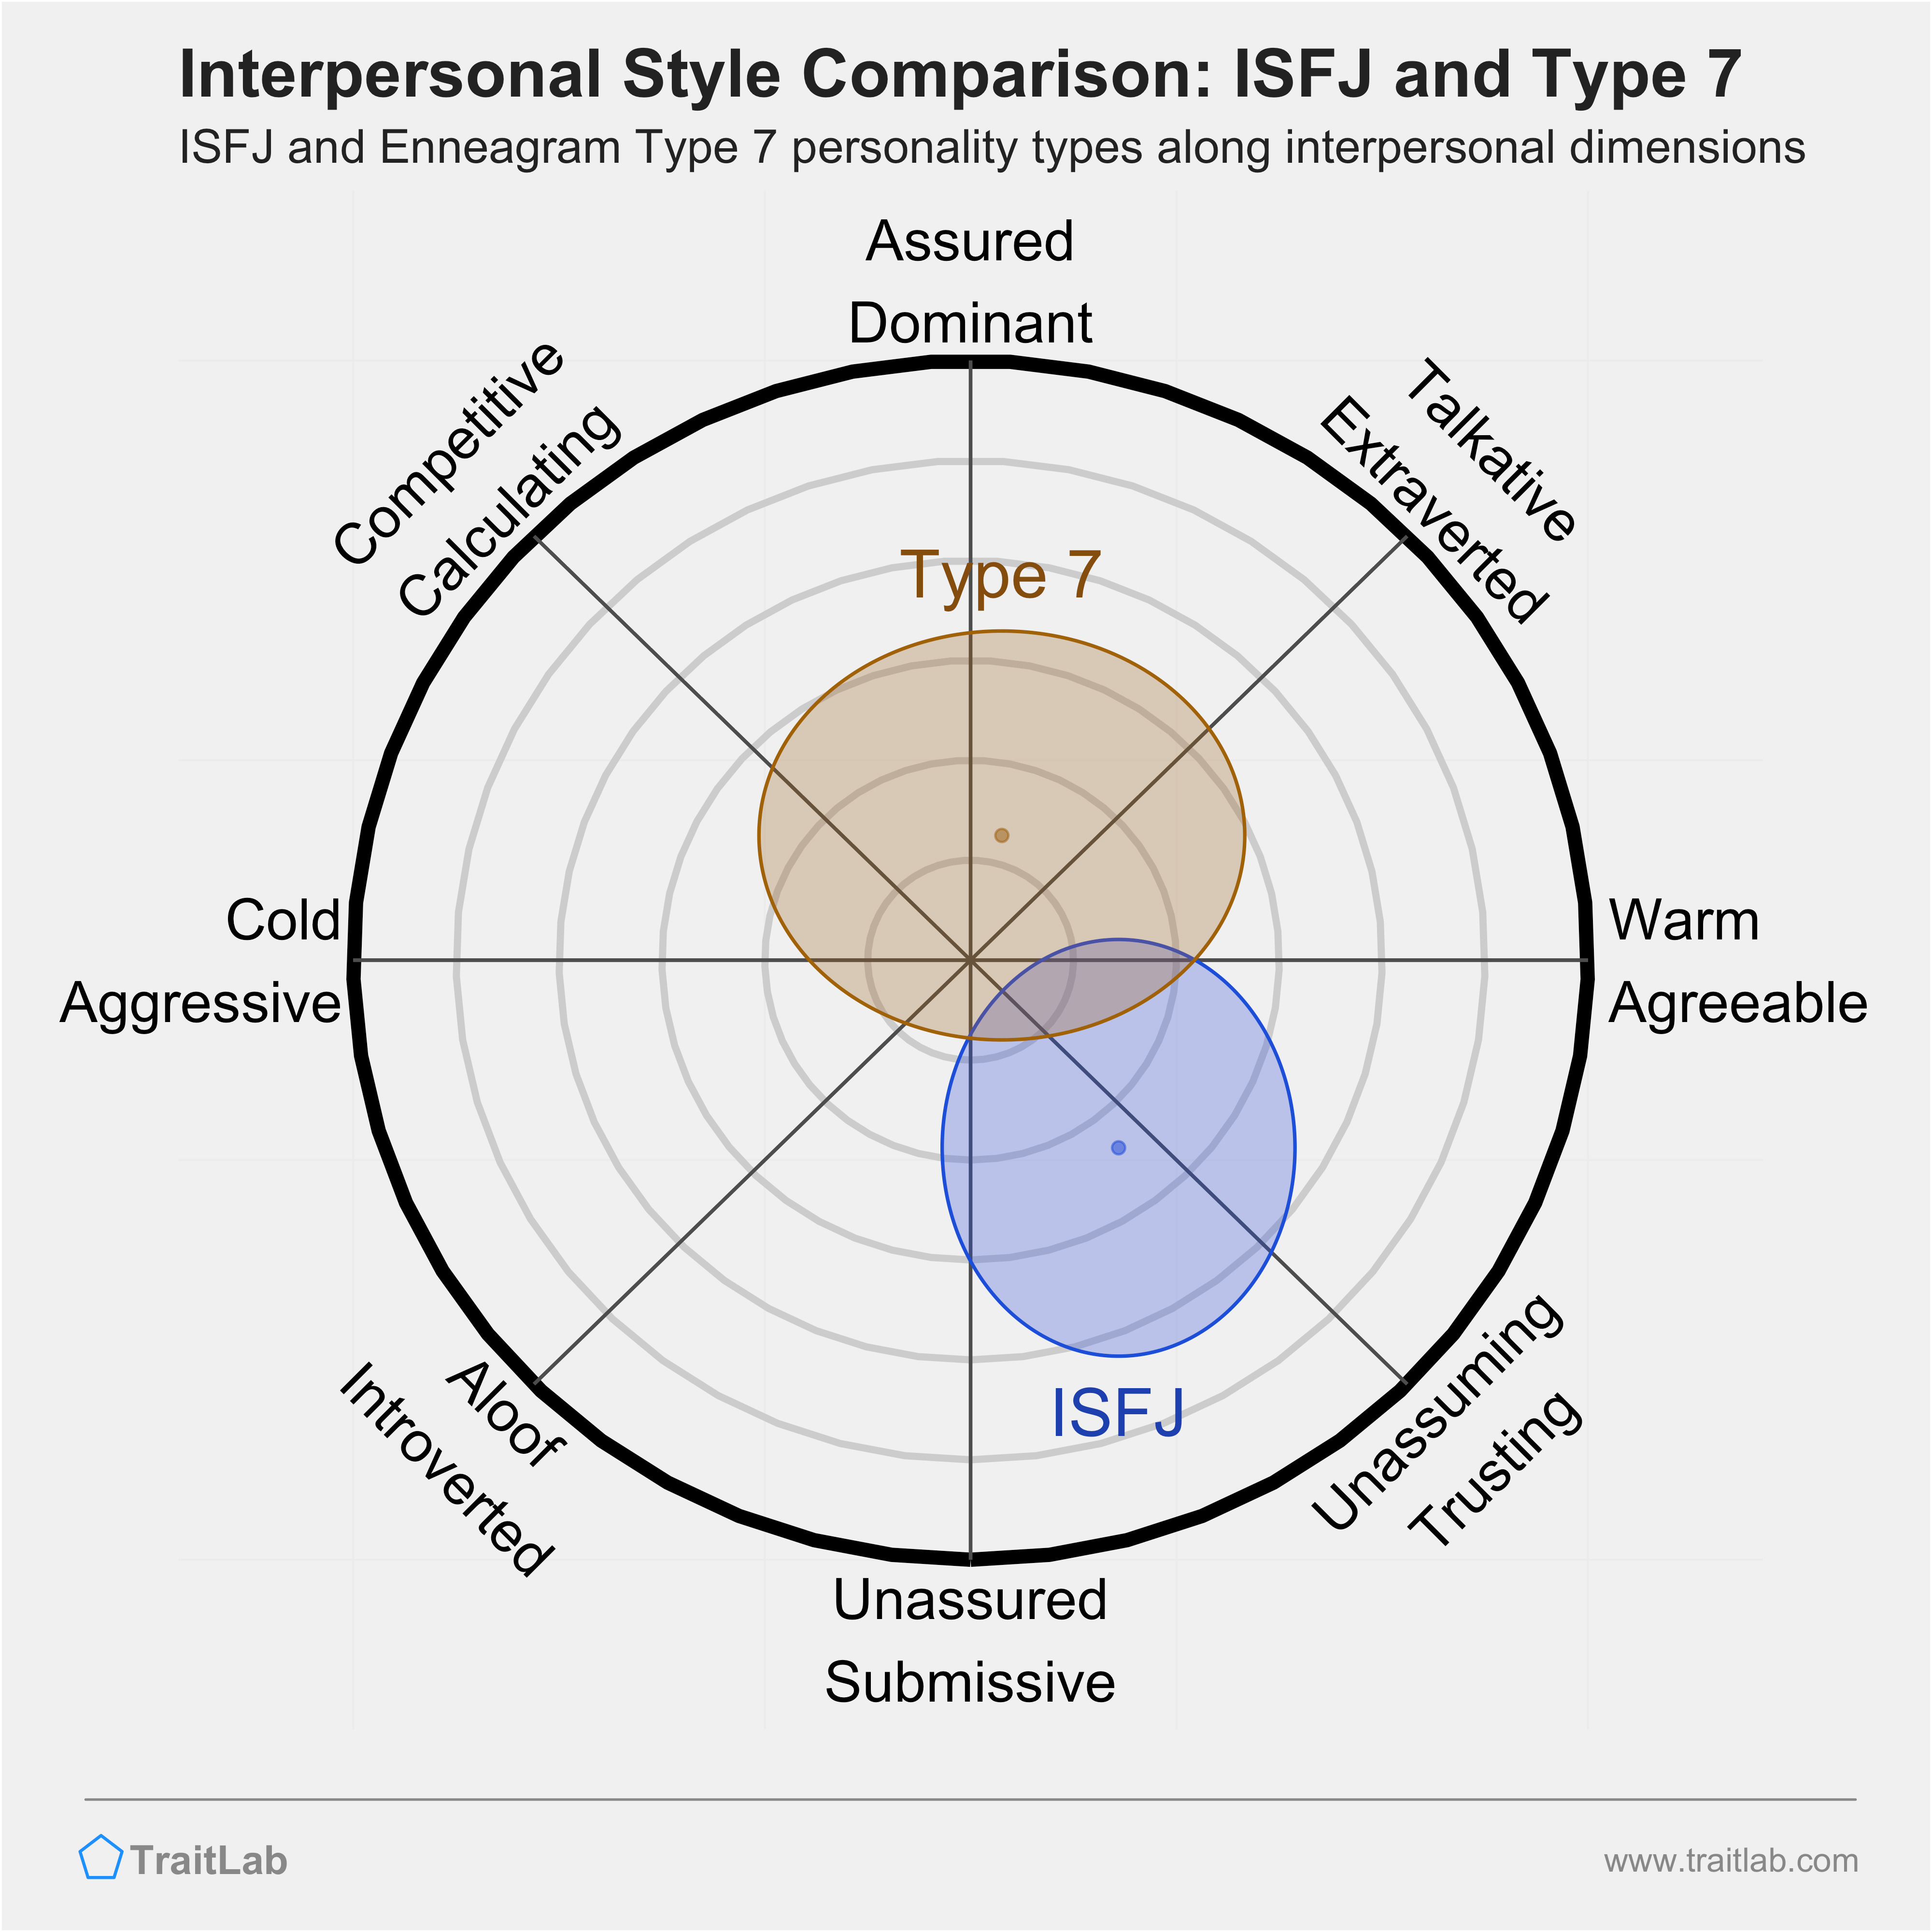 Enneagram ISFJ and Type 7 comparison across interpersonal dimensions